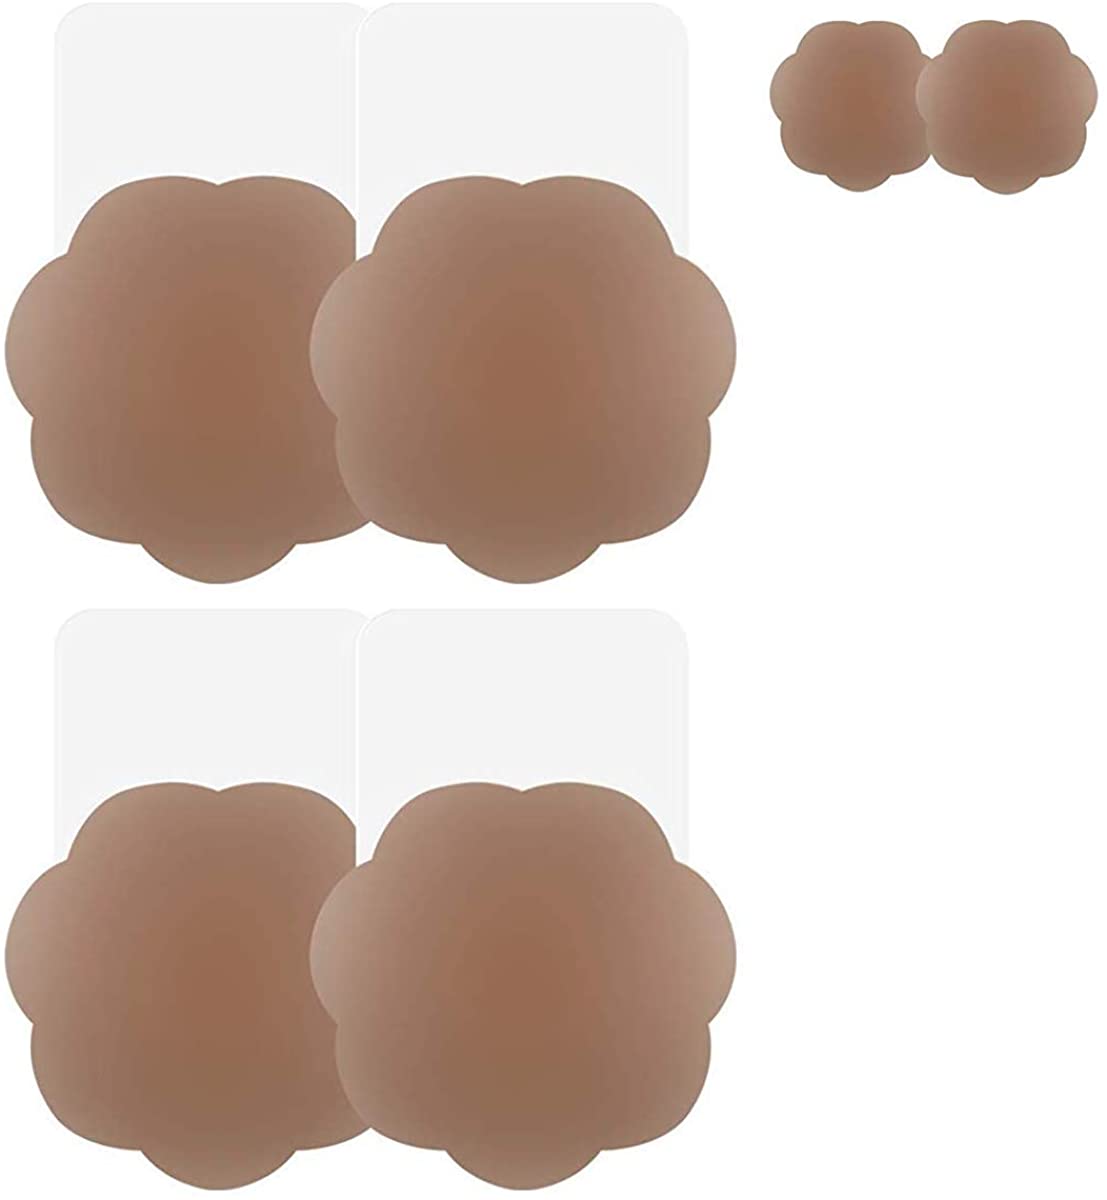 Price:$10.99 Niidor Nipplecovers Breast Lift Petals Brown Silicone bra Push up Adhesive Reusable Pasties for Women-Brown(2pair flower) at Amazon Women’s Clothing store